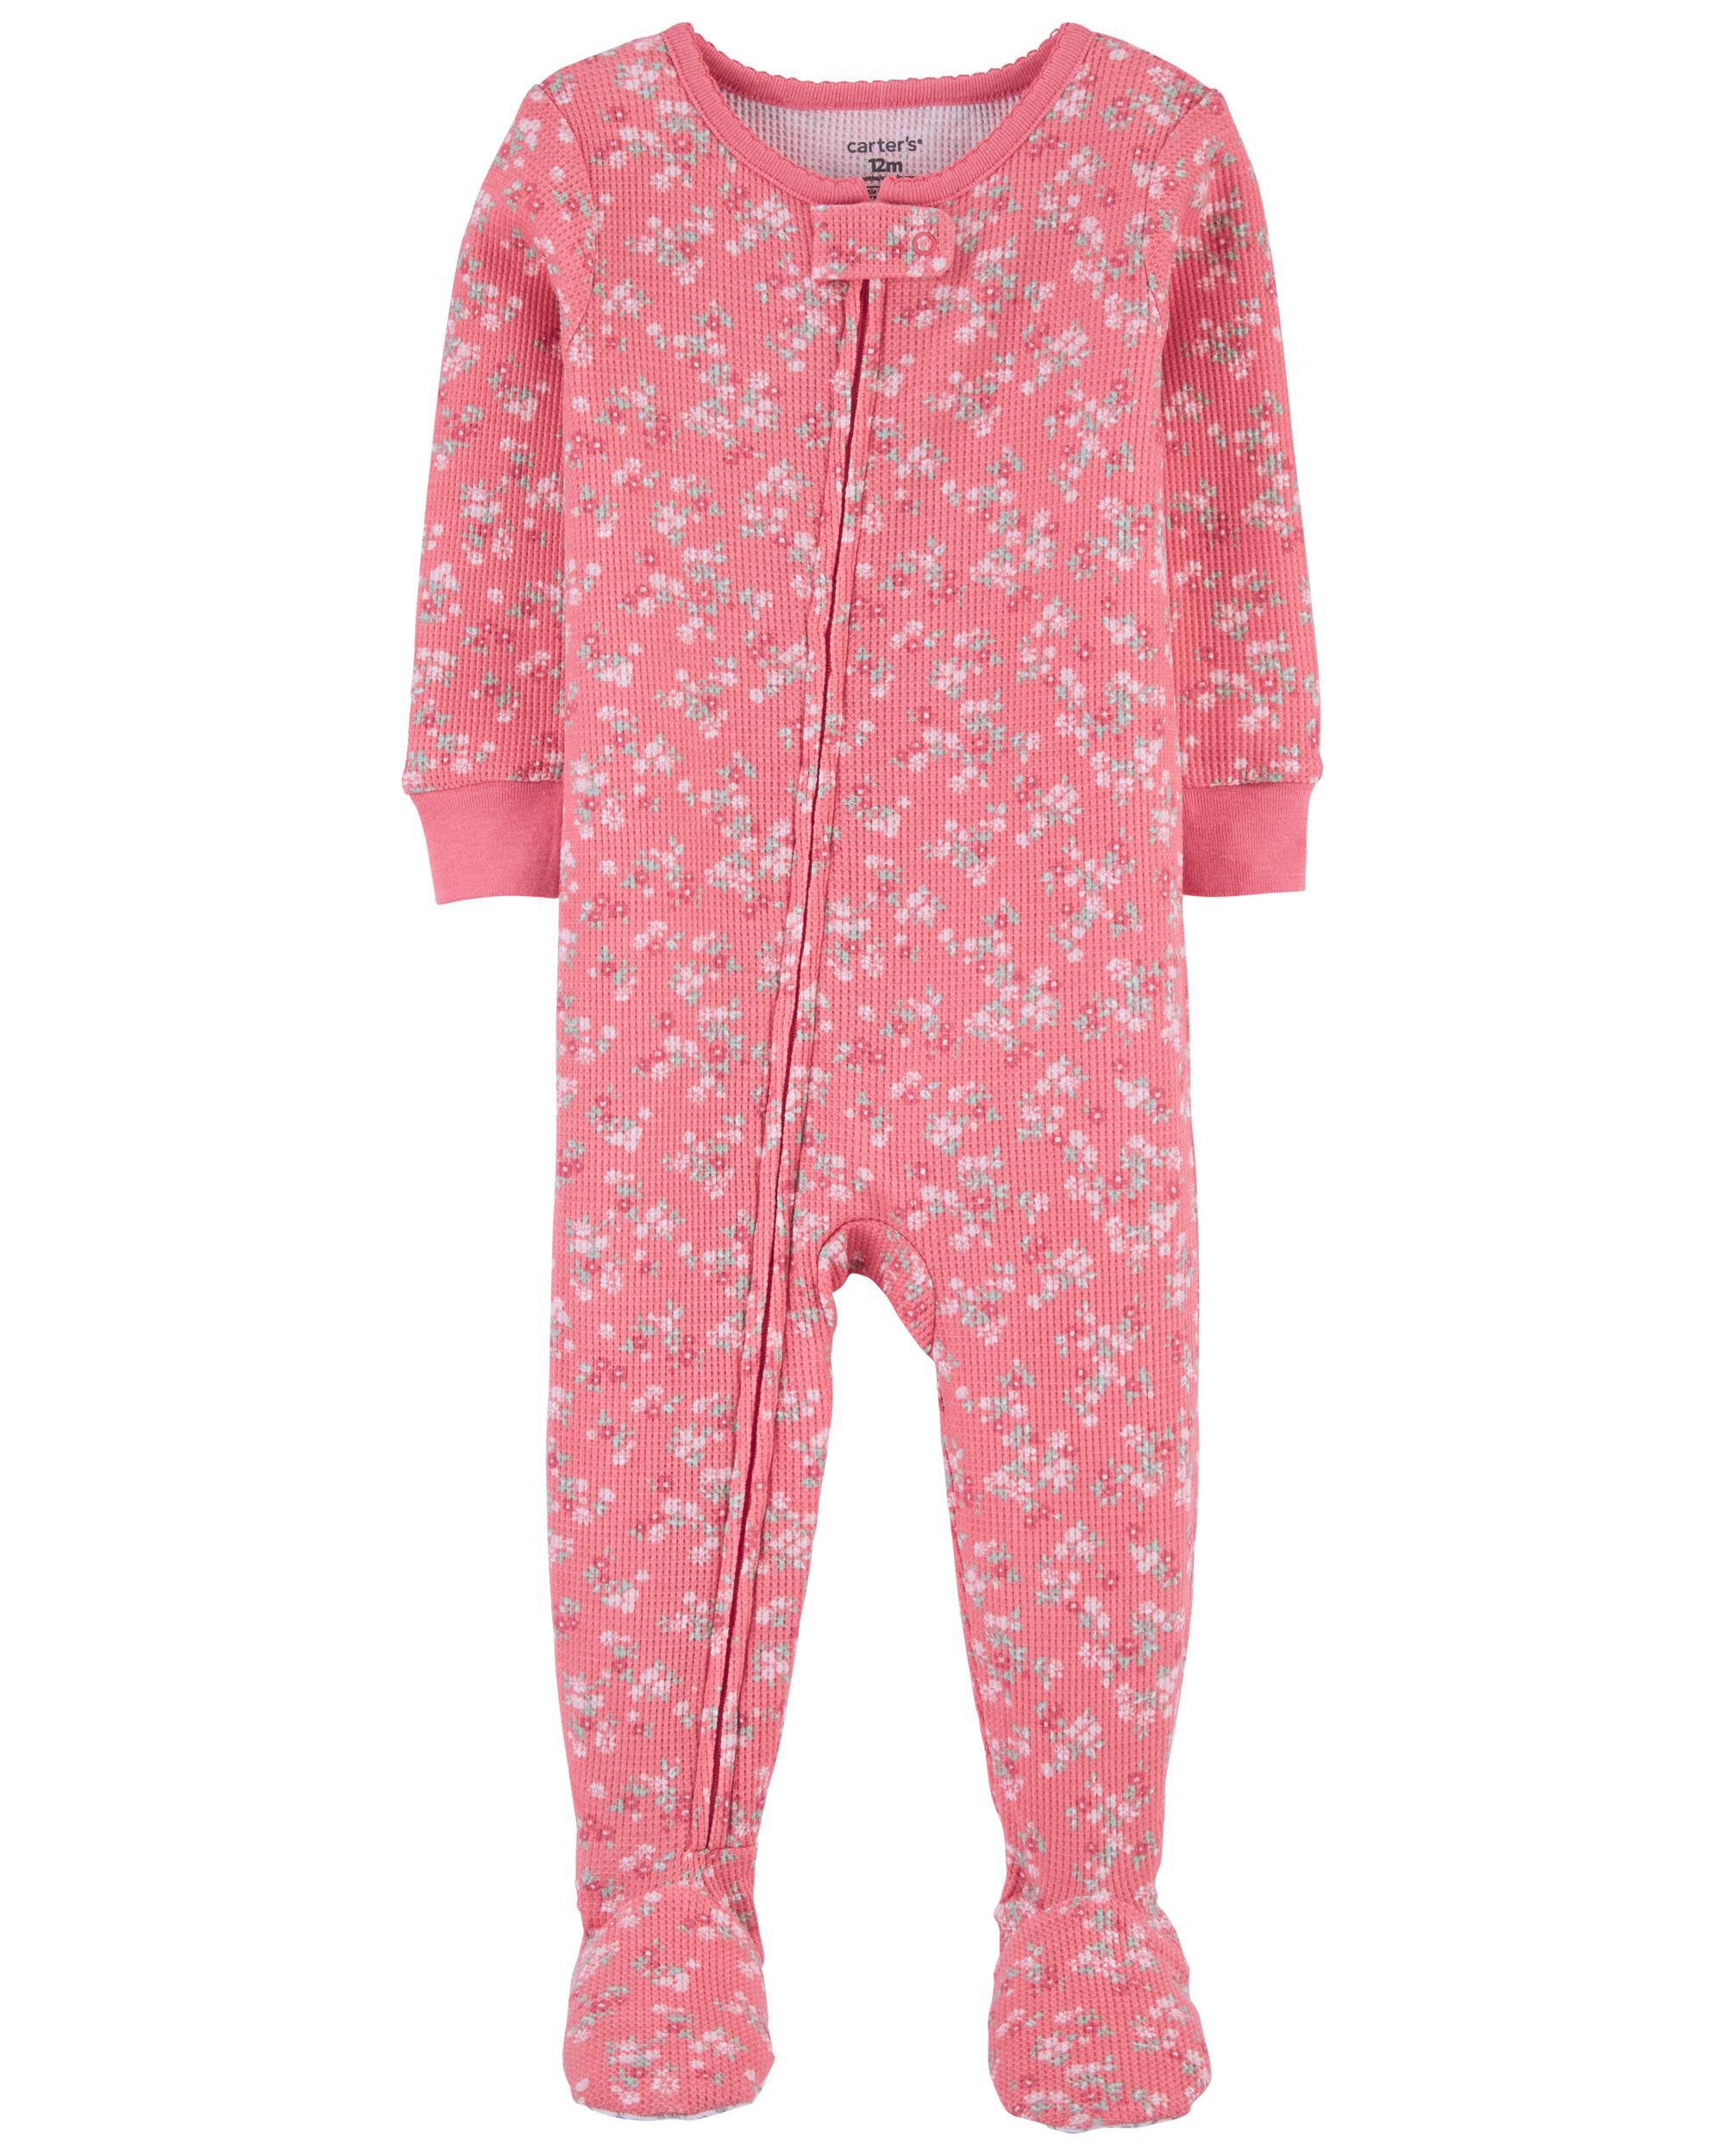 2T Valentine Hearts NWT Girl's Carter's Soft & Warm Zip Footed Sleeper 